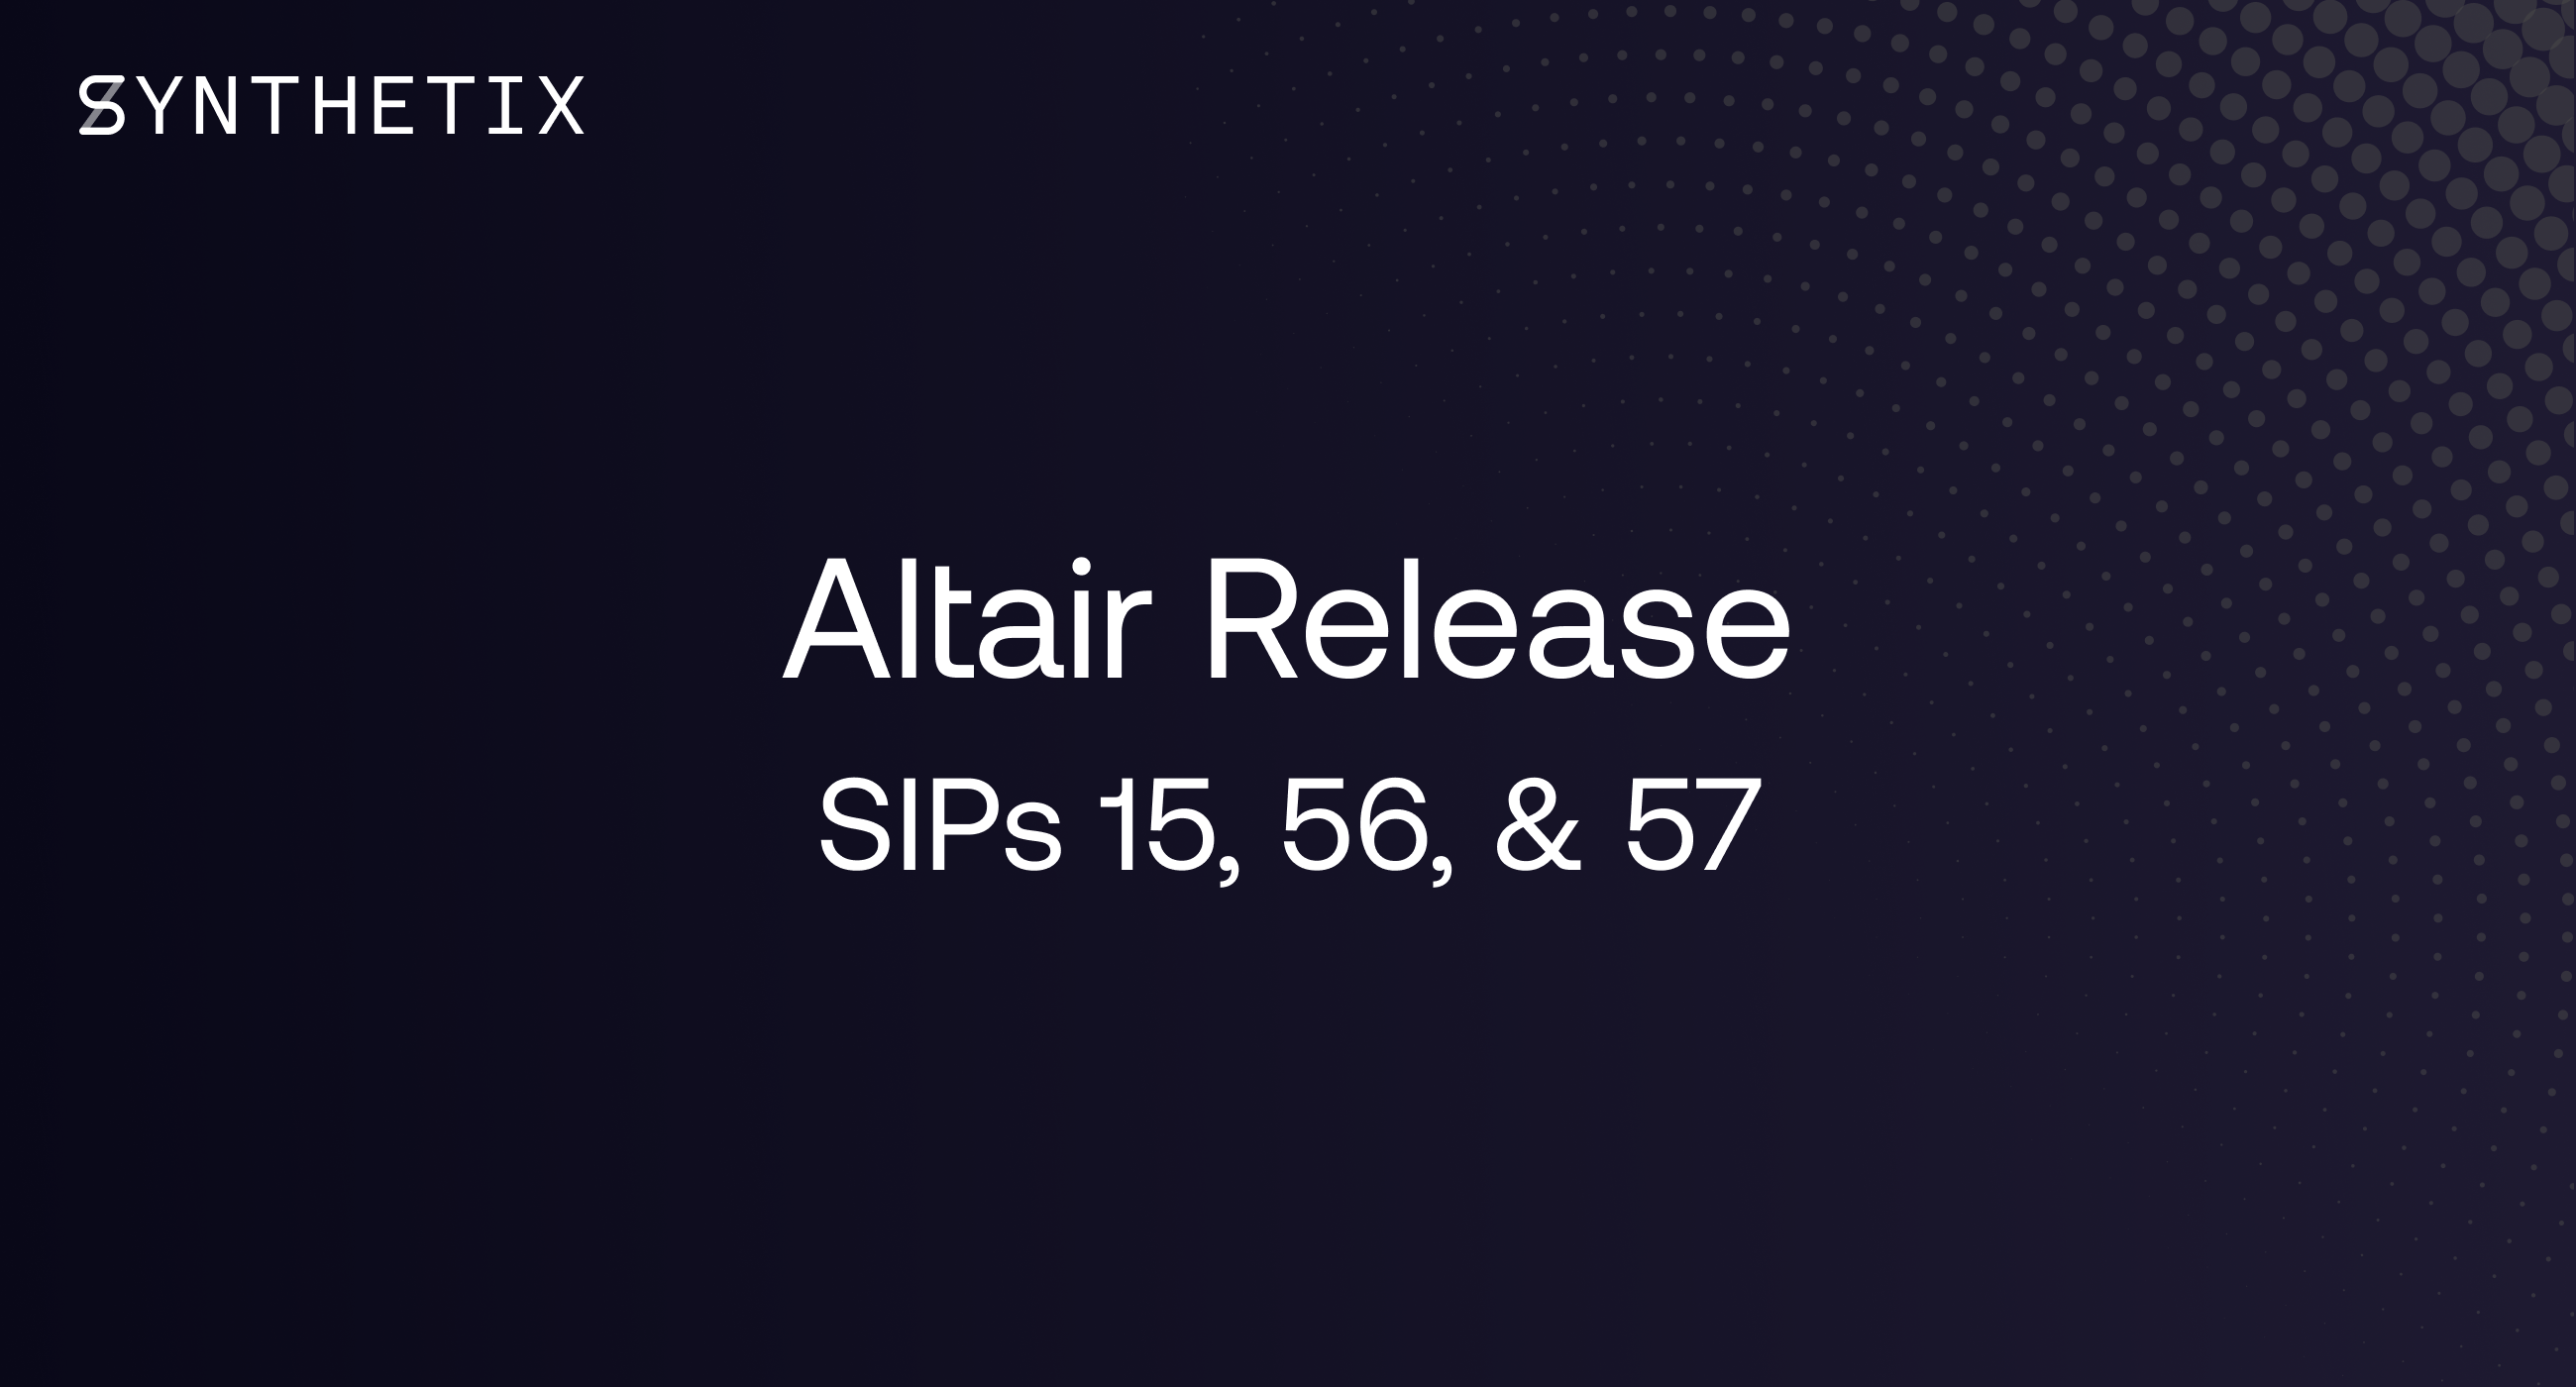 The Altair release